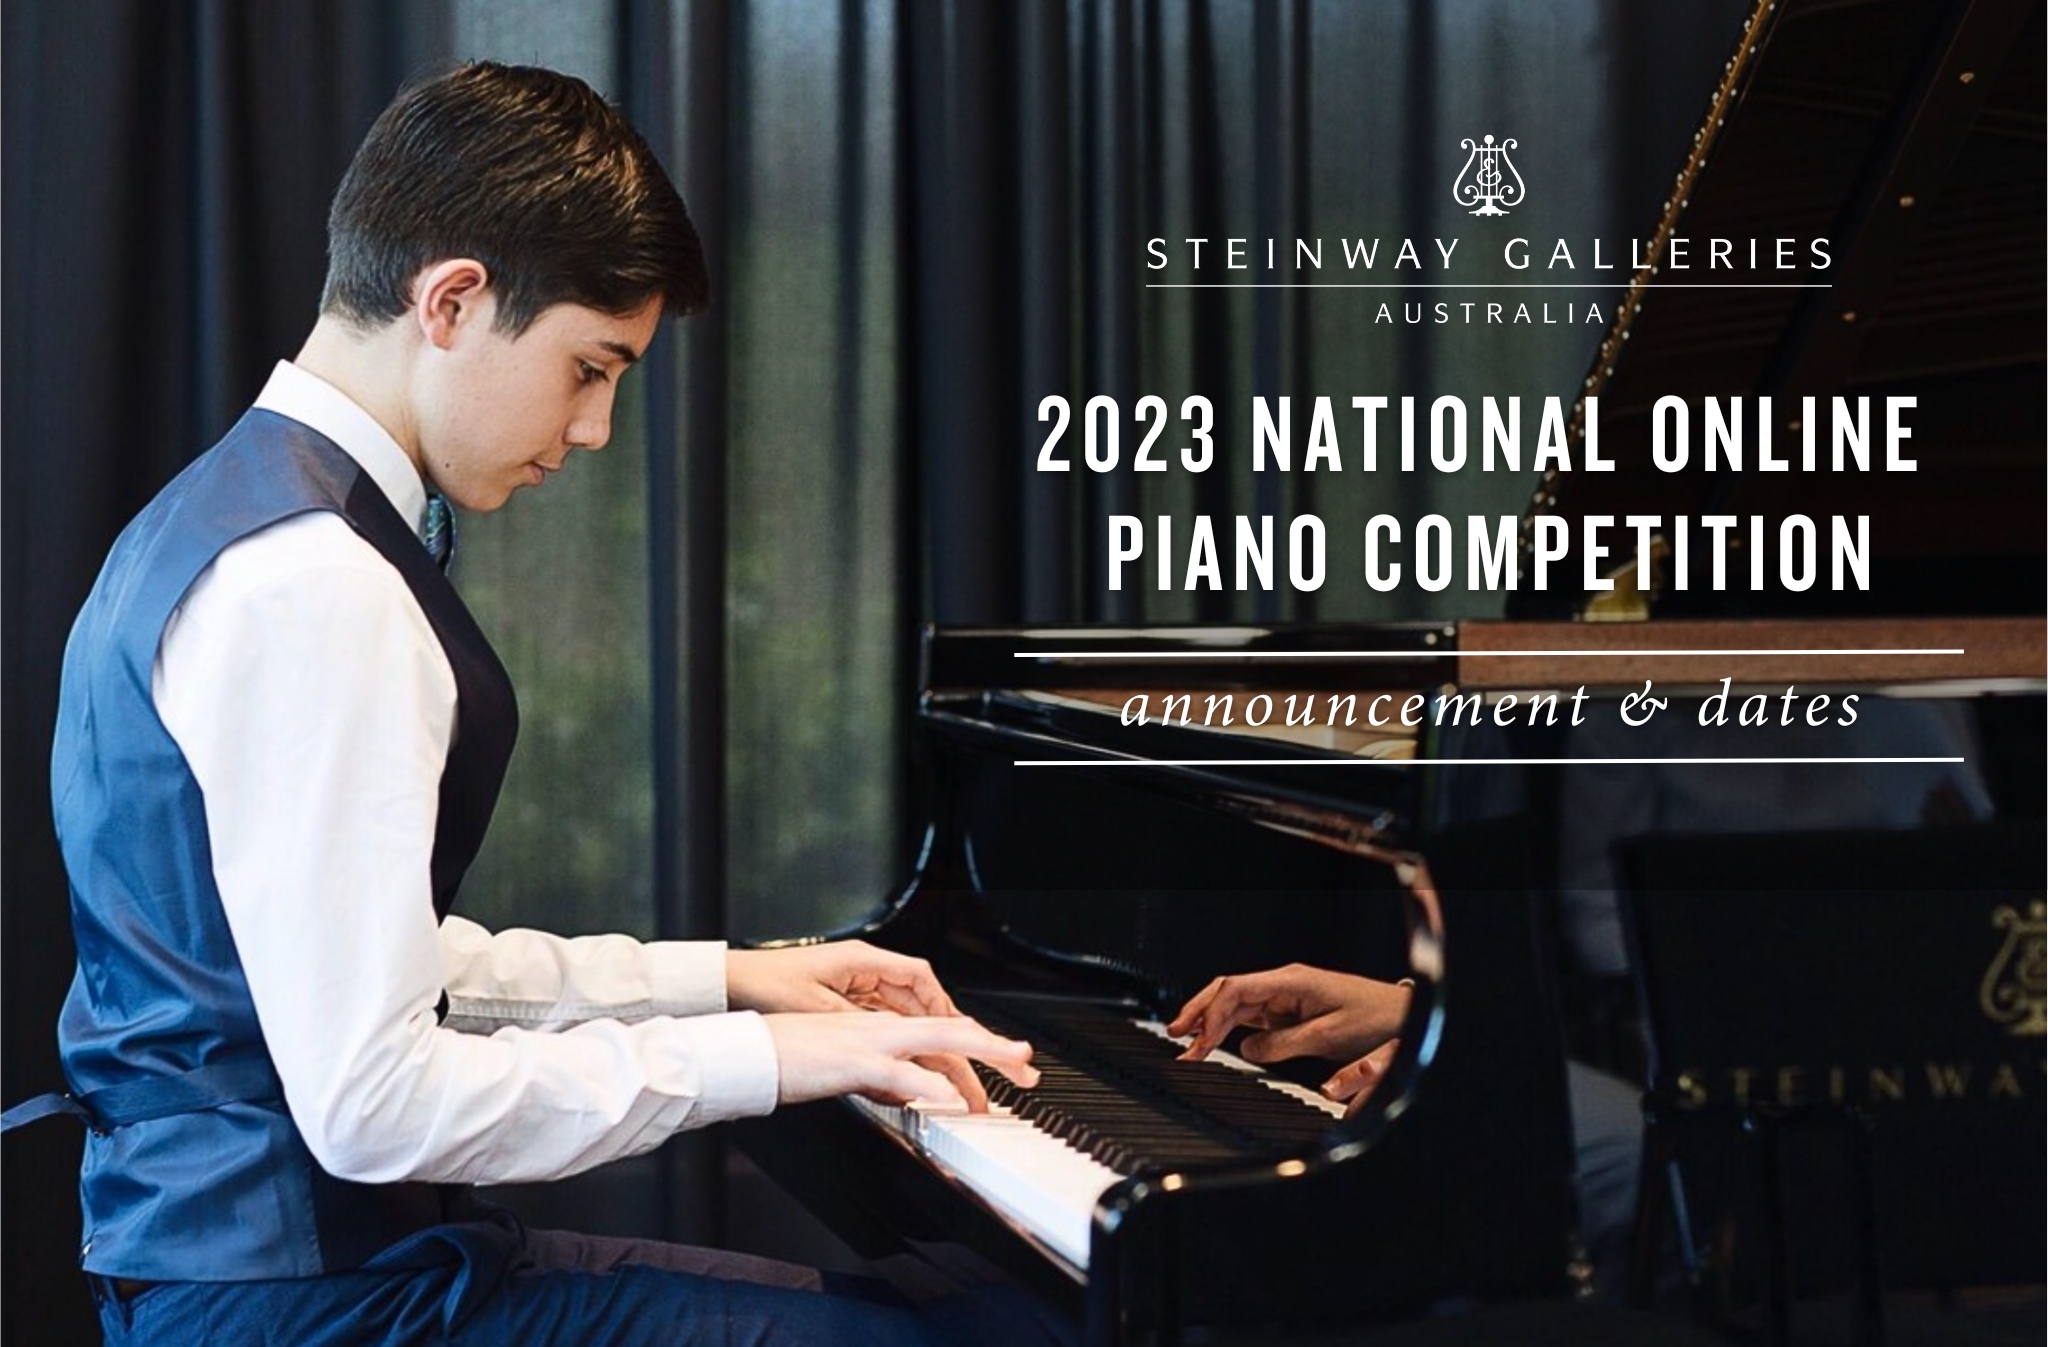 2023 Steinway Galleries Australia National Online Piano Competition